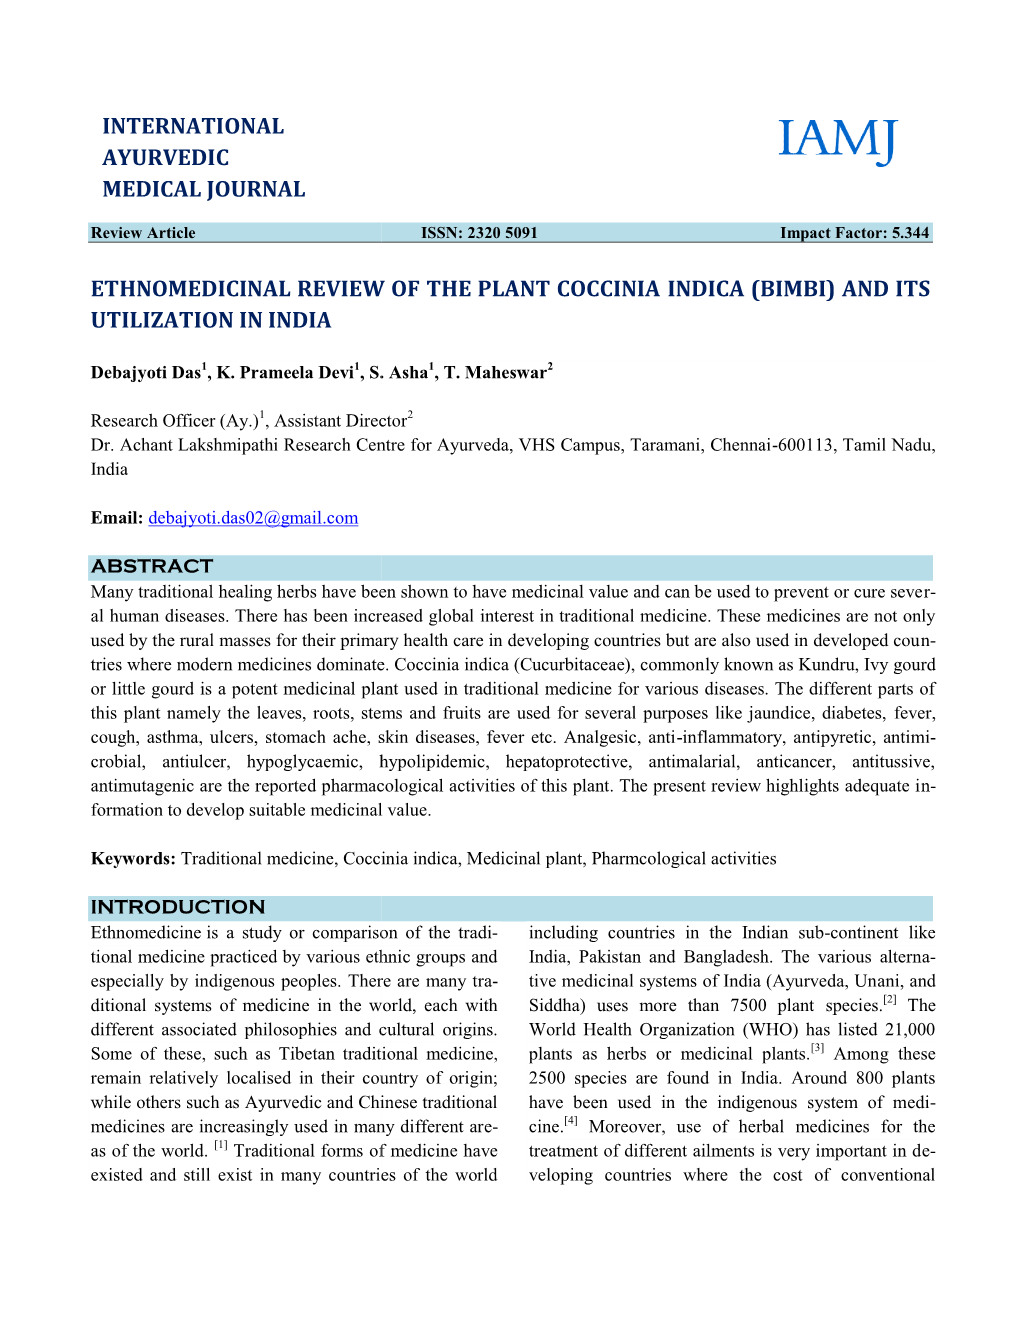 Ethnomedicinal Review of the Pl Utilization in India